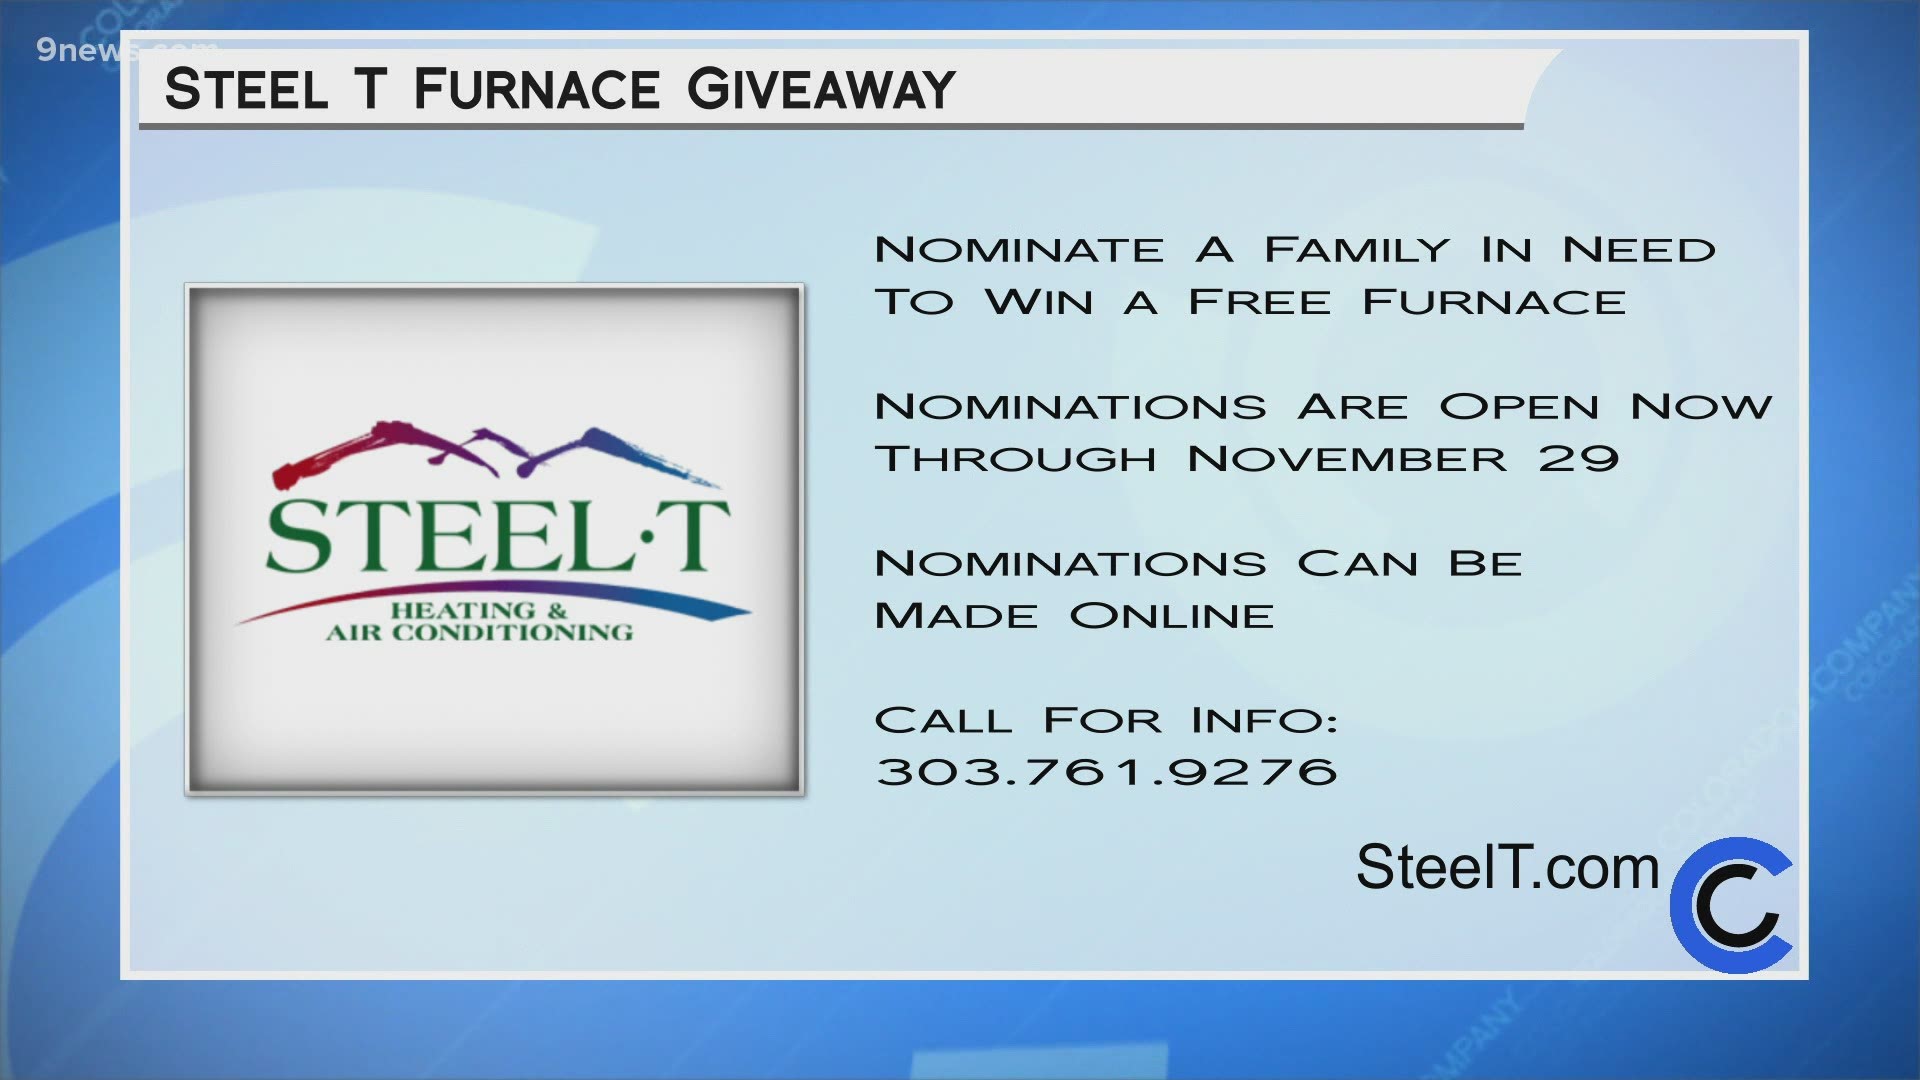 Go to SteelT.com to nominate someone to win a free furnace or to learn more about keeping your furnace working properly this winter. You can also call 303.761.9276.